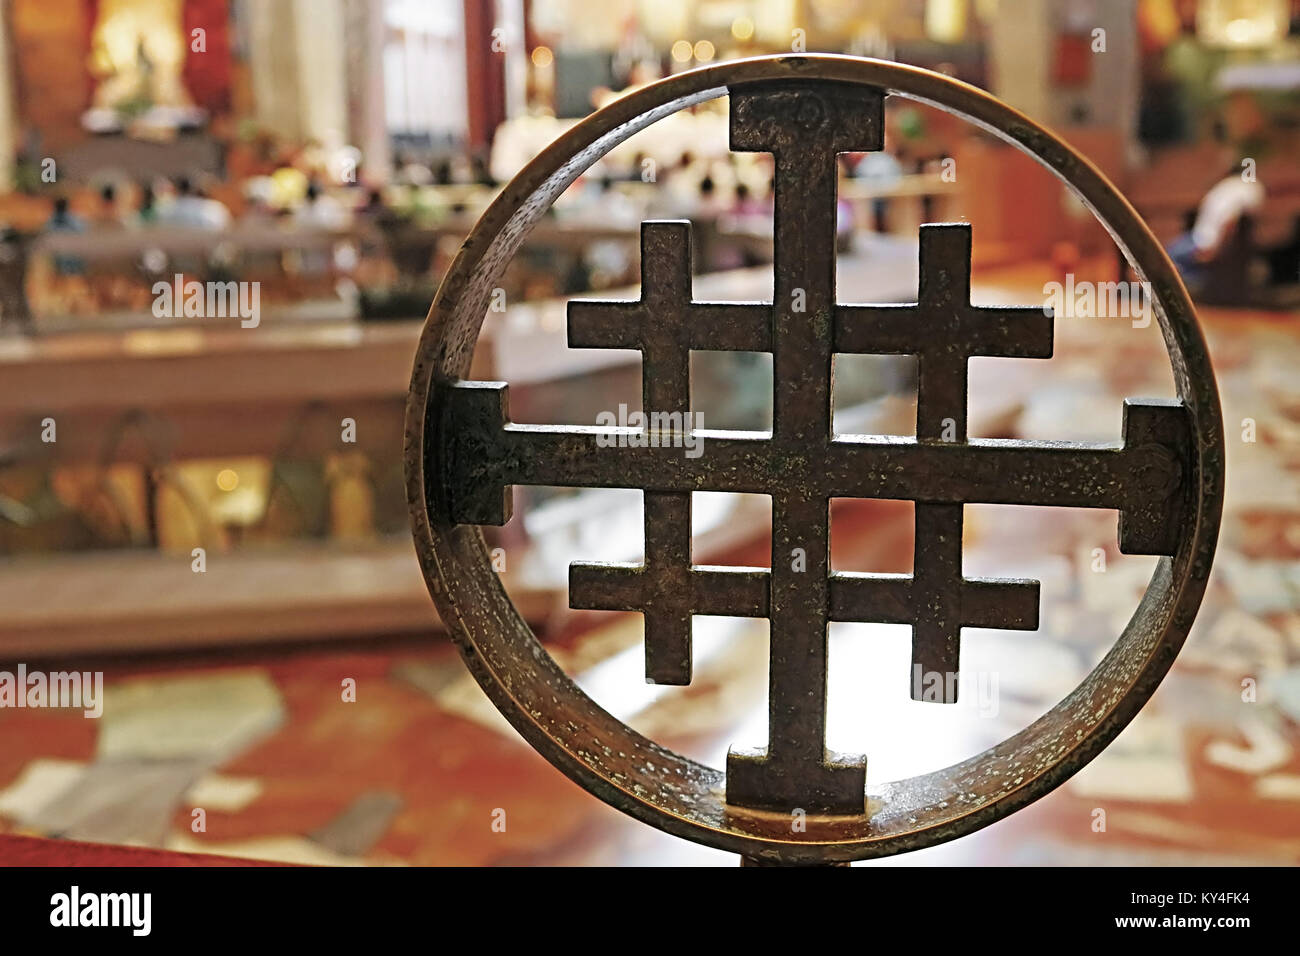 NAZARETH, ISRAEL - SEPTEMBER 21, 2017: Cross in the Basilica of the Annunciation Stock Photo